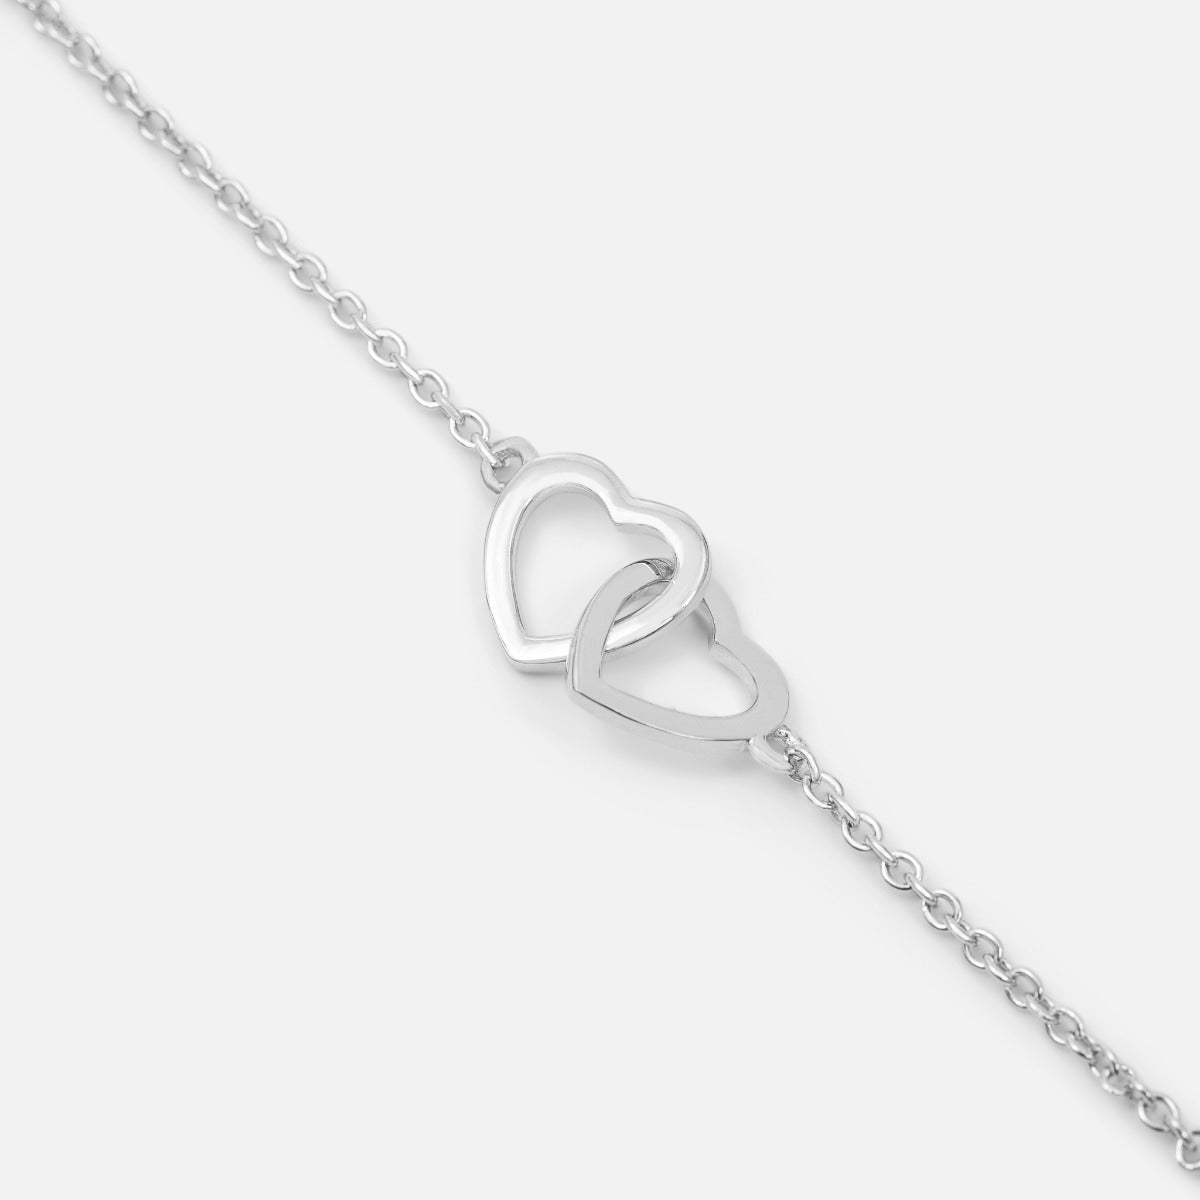 Sterling silver thin cahin necklace with hearts pendant